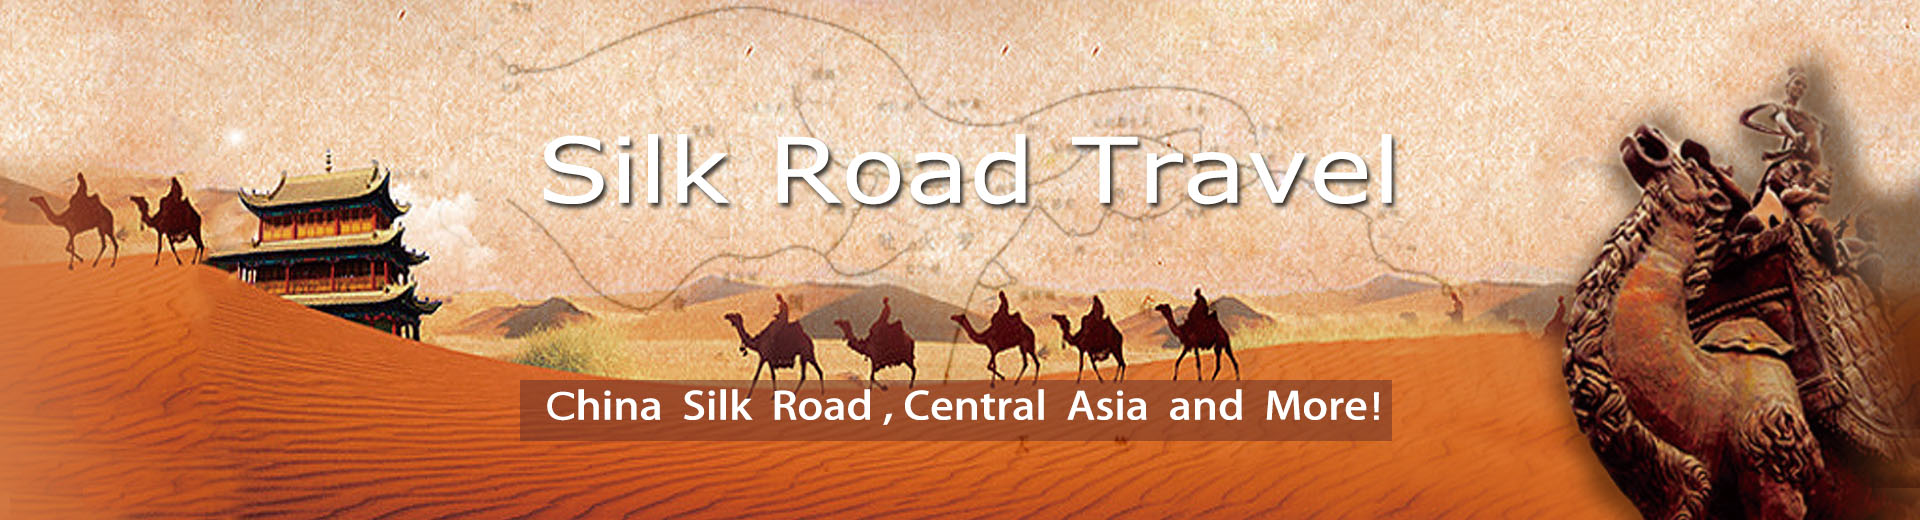 travel the silk road independently